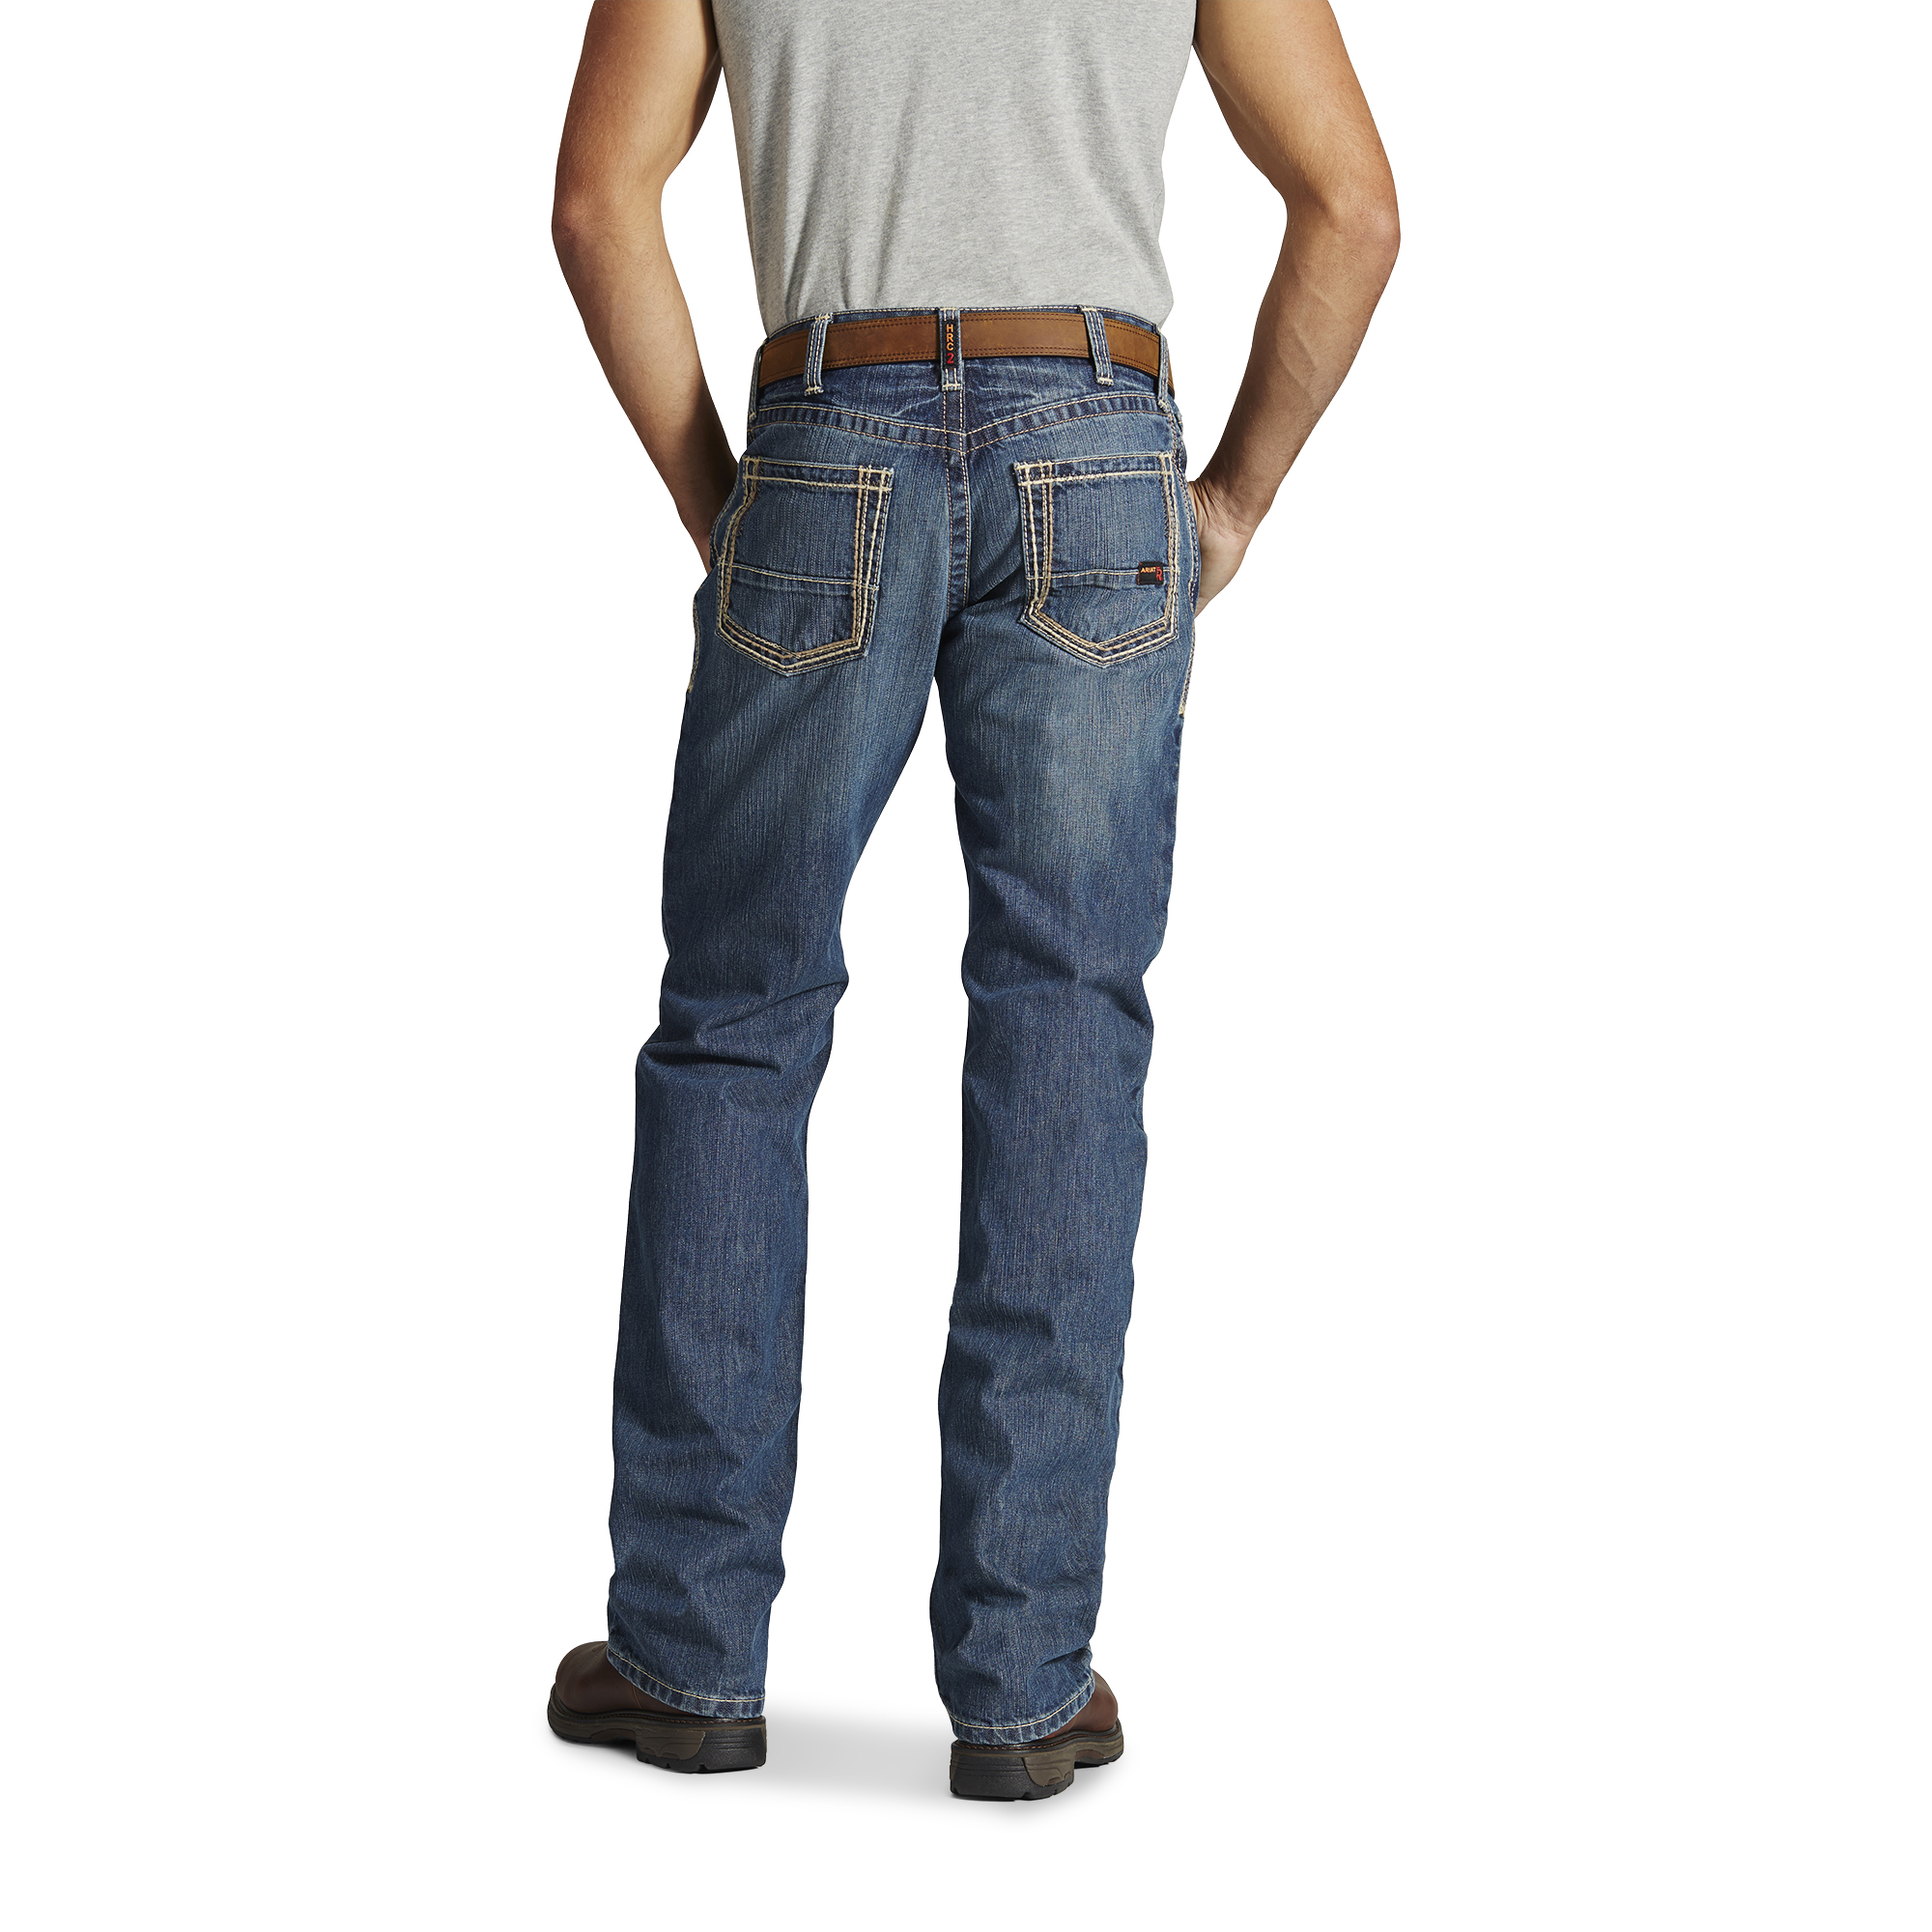 Buy Ariat FR M4 Low Rise Boundary Boot Cut Jean - Ariat Online at Best ...